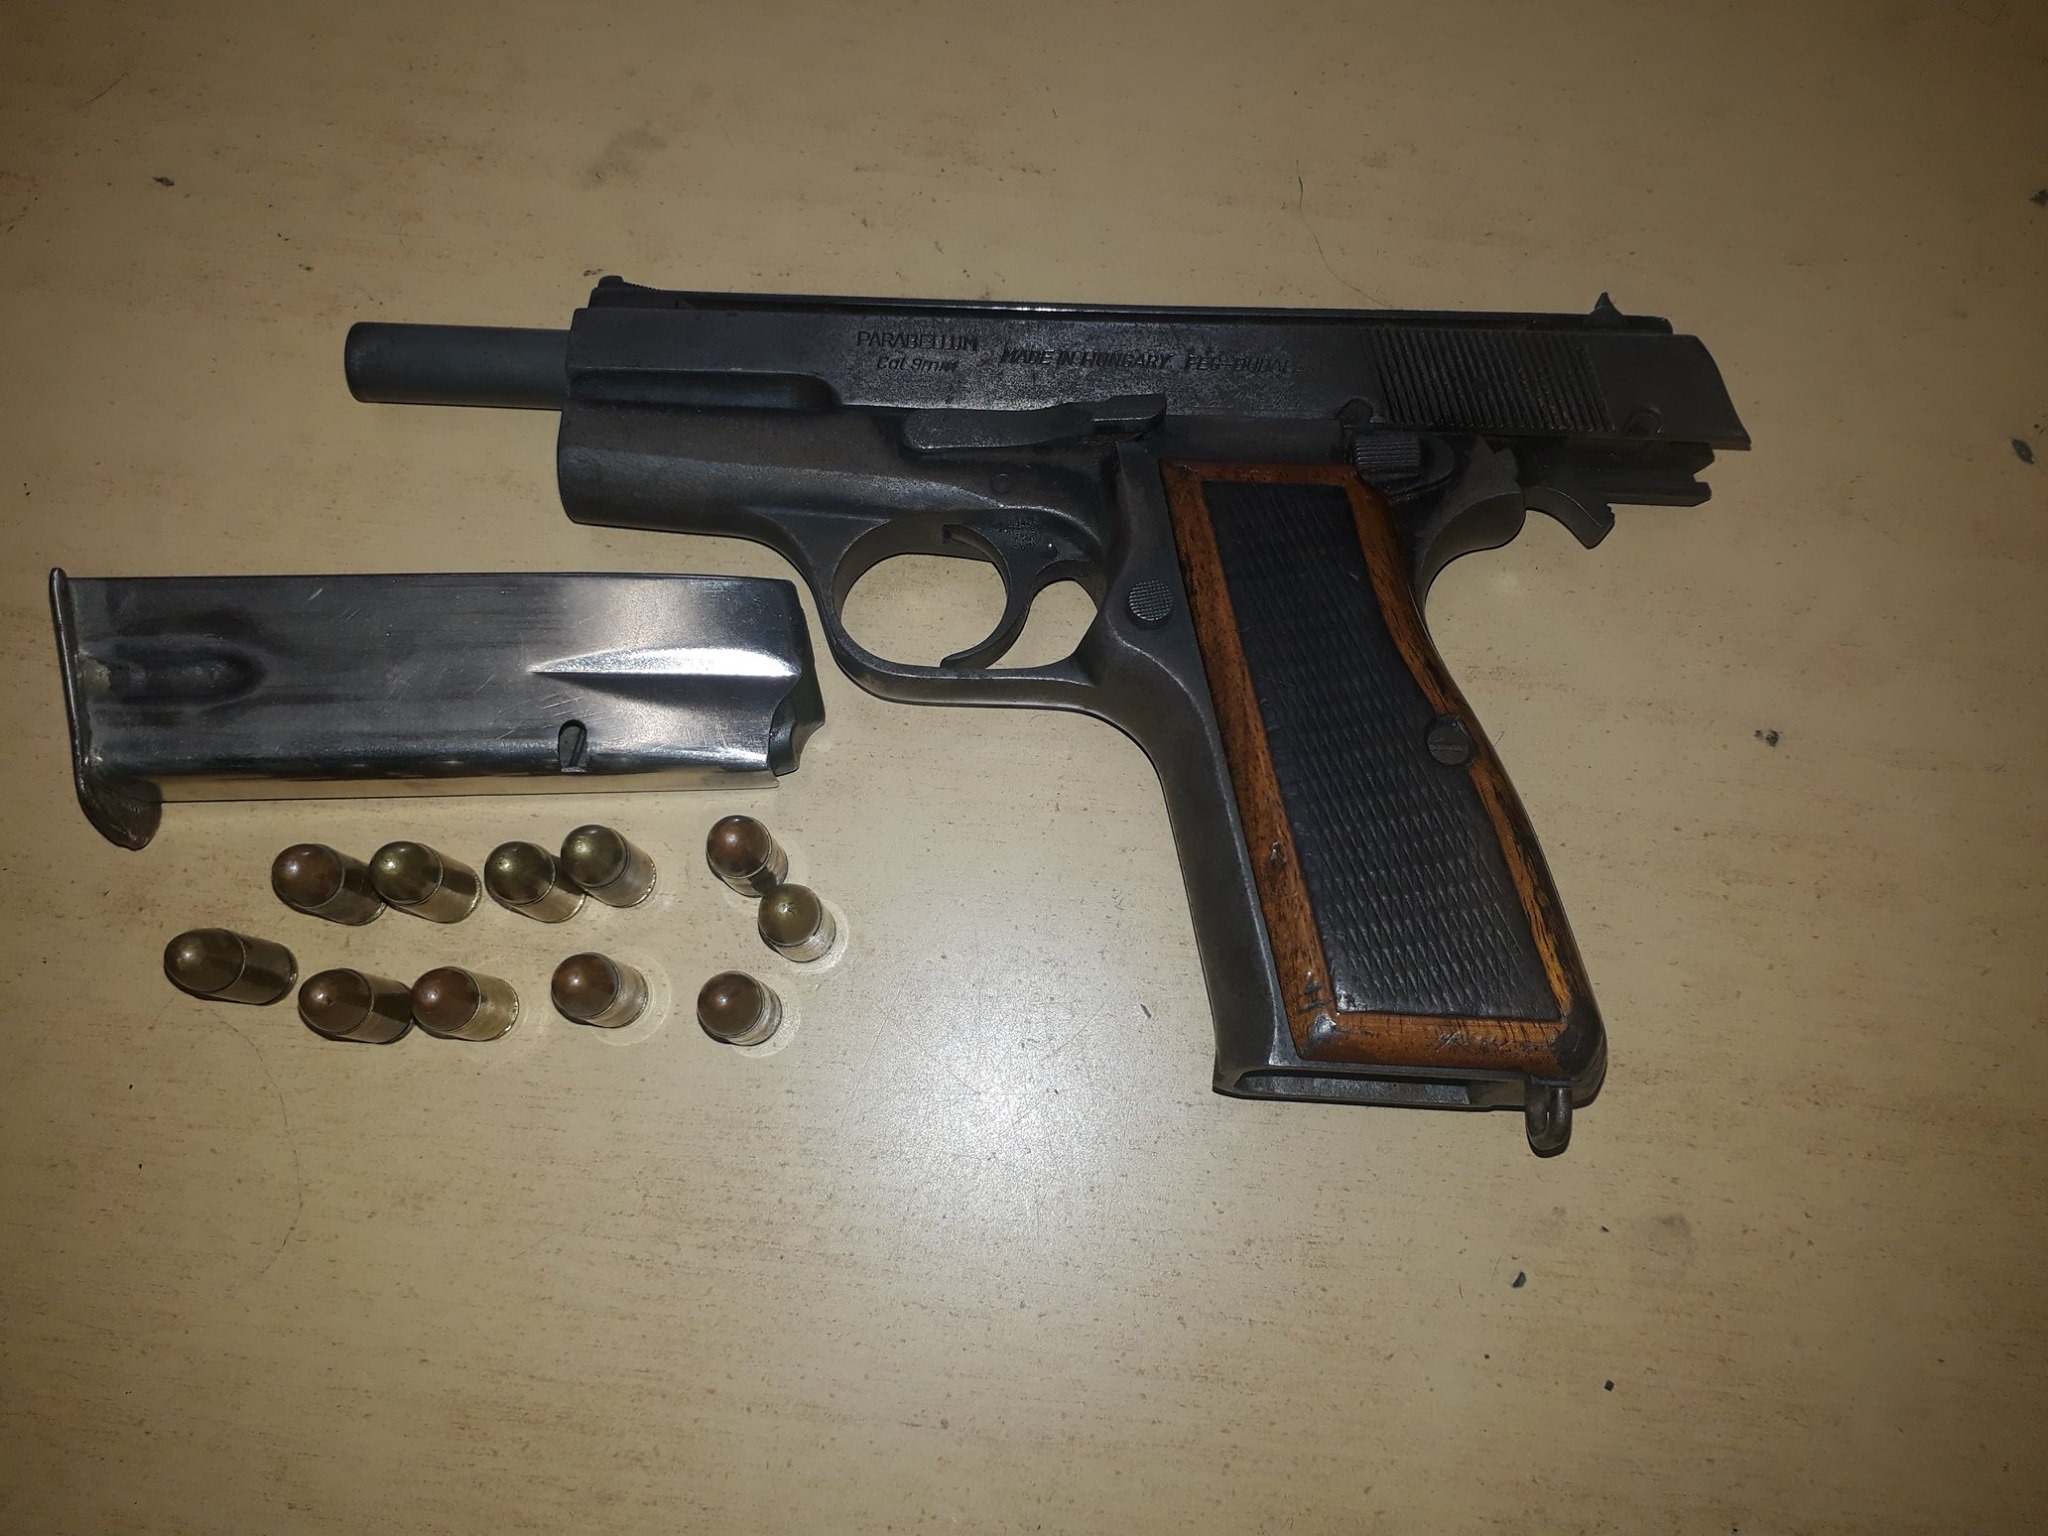 Suspect arrested with firearm in Steenberg